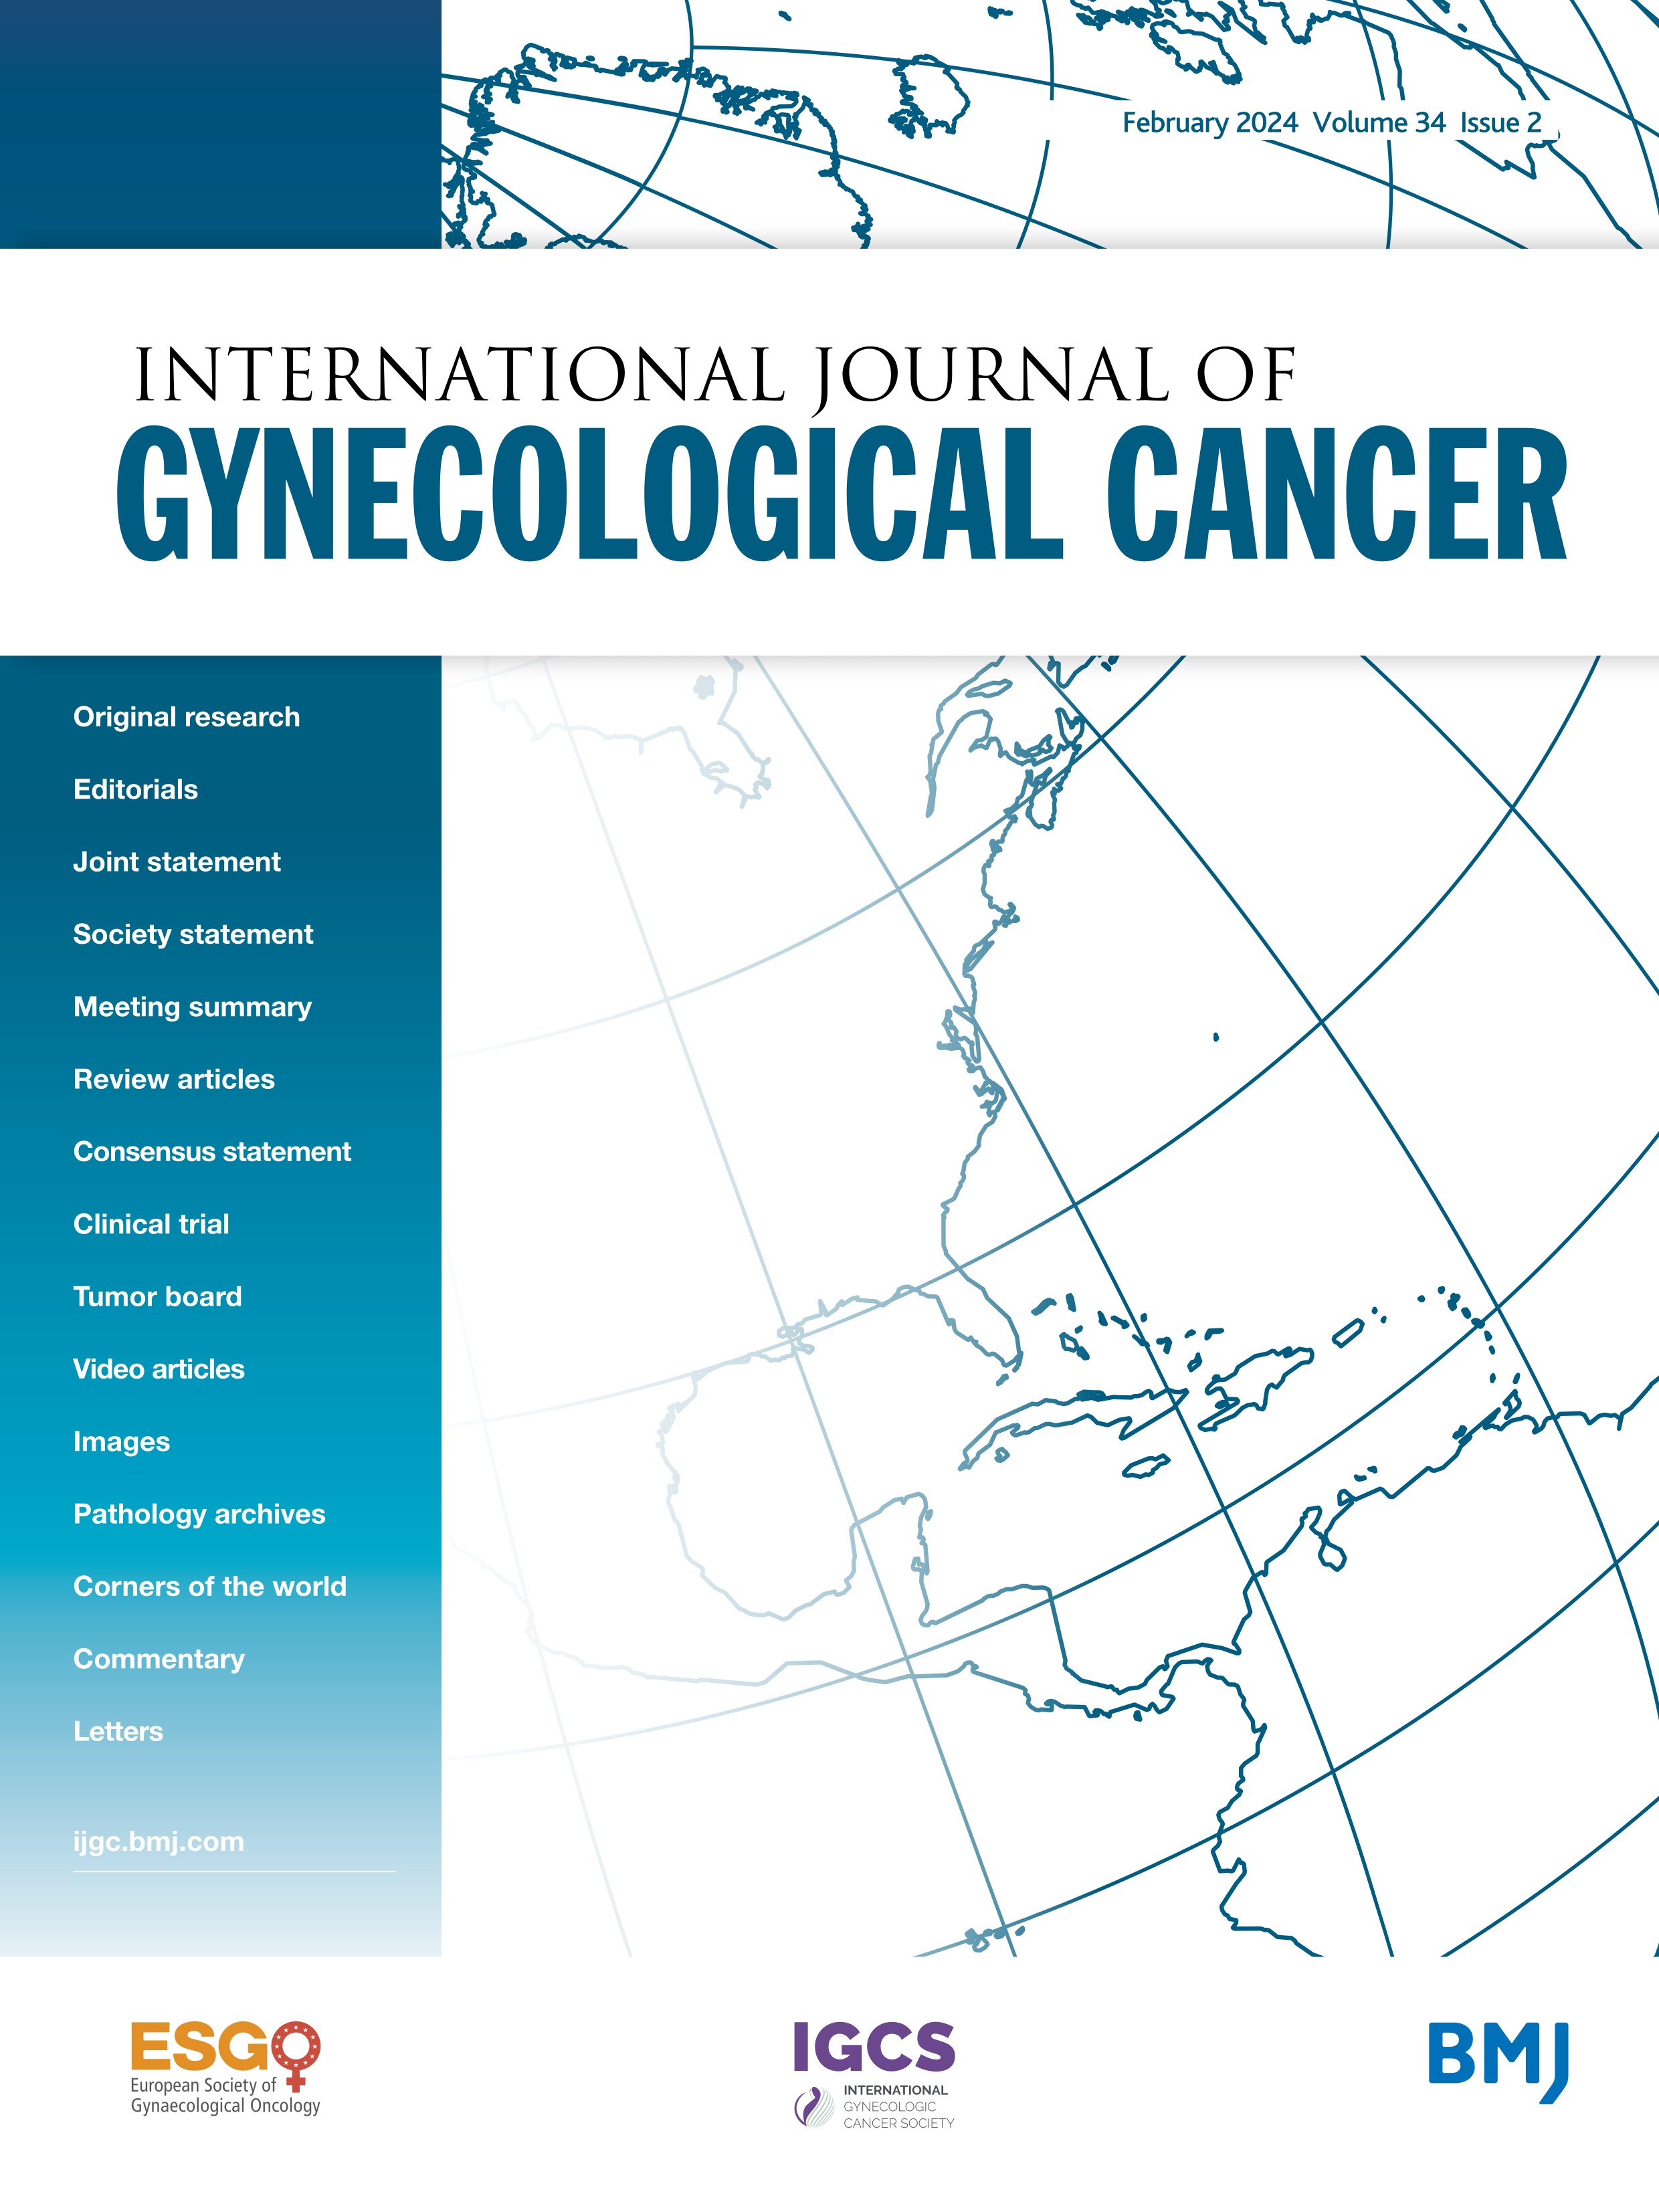 Low-grade versus high-grade serous ovarian cancer: comparison of surgical outcomes after secondary cytoreductive surgery